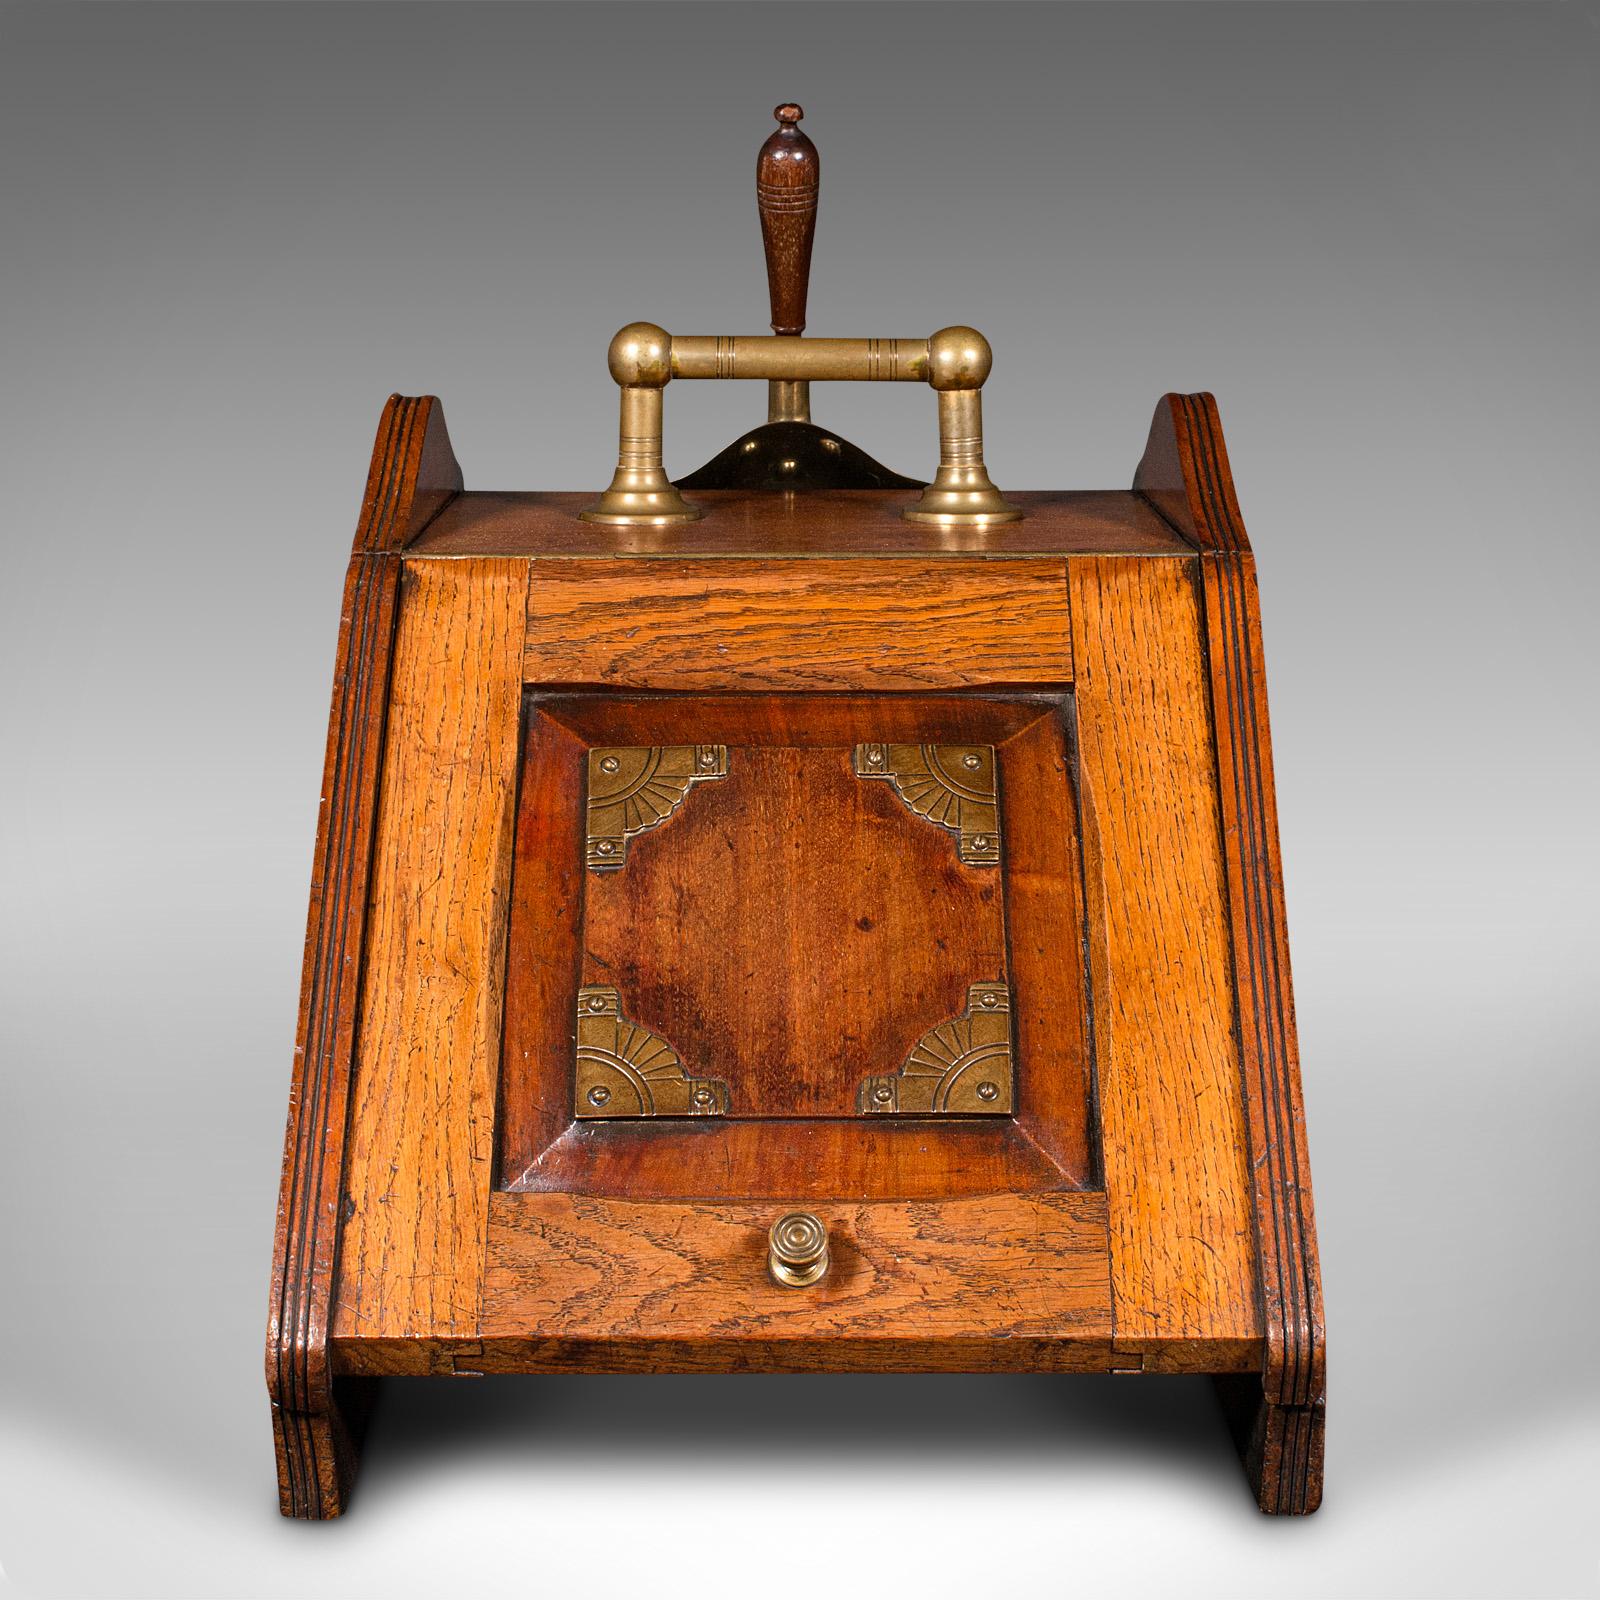 Late Victorian Antique Coal Purdonium, English, Oak, Fireside, Arts and Crafts, Victorian, 1890 For Sale